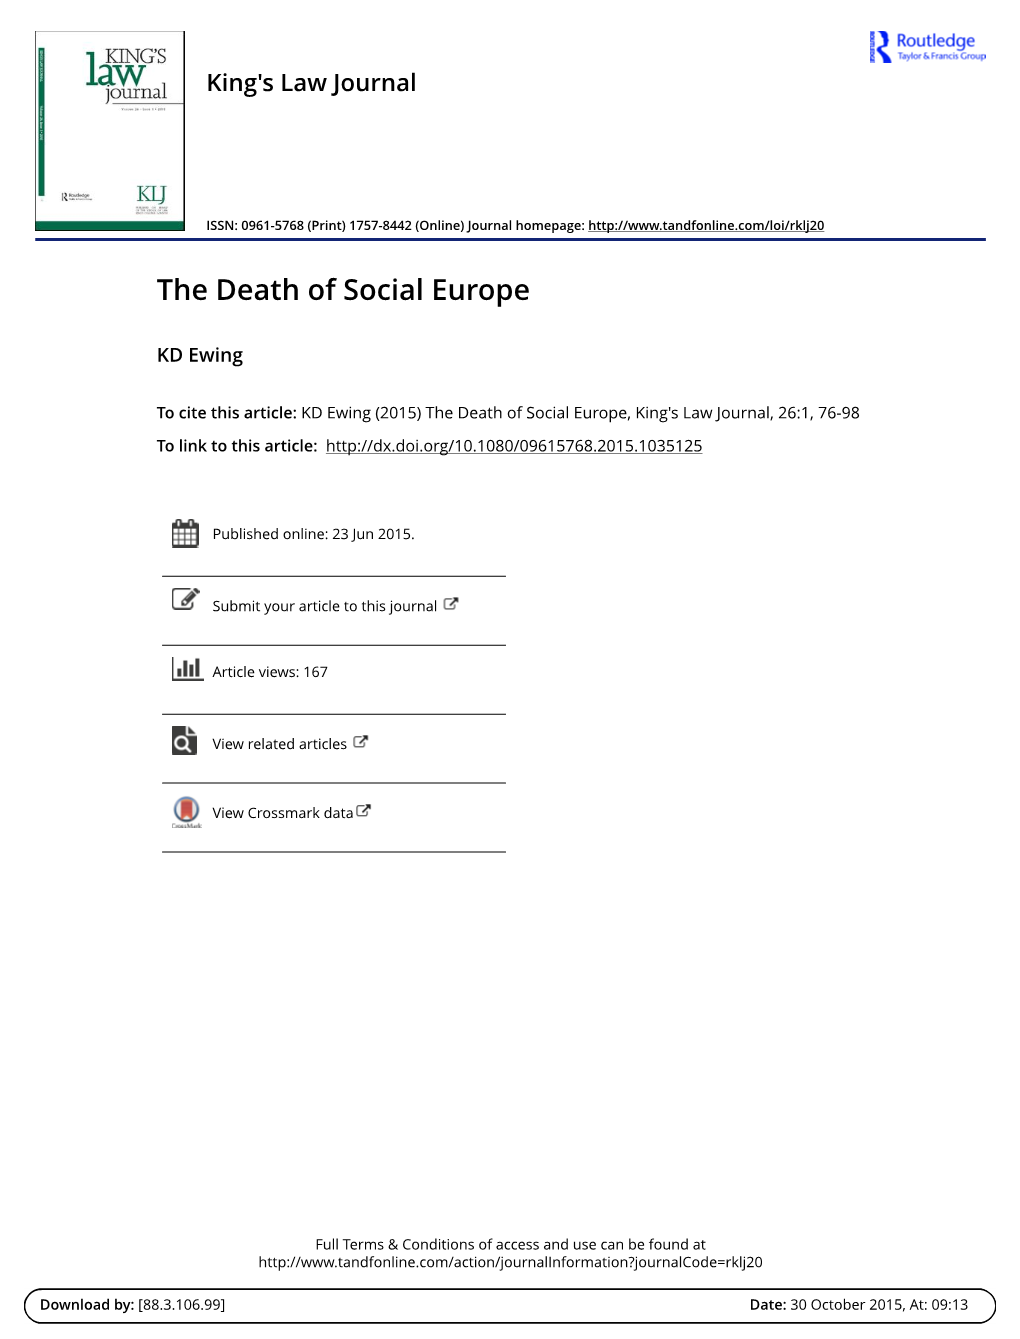 The Death of Social Europe